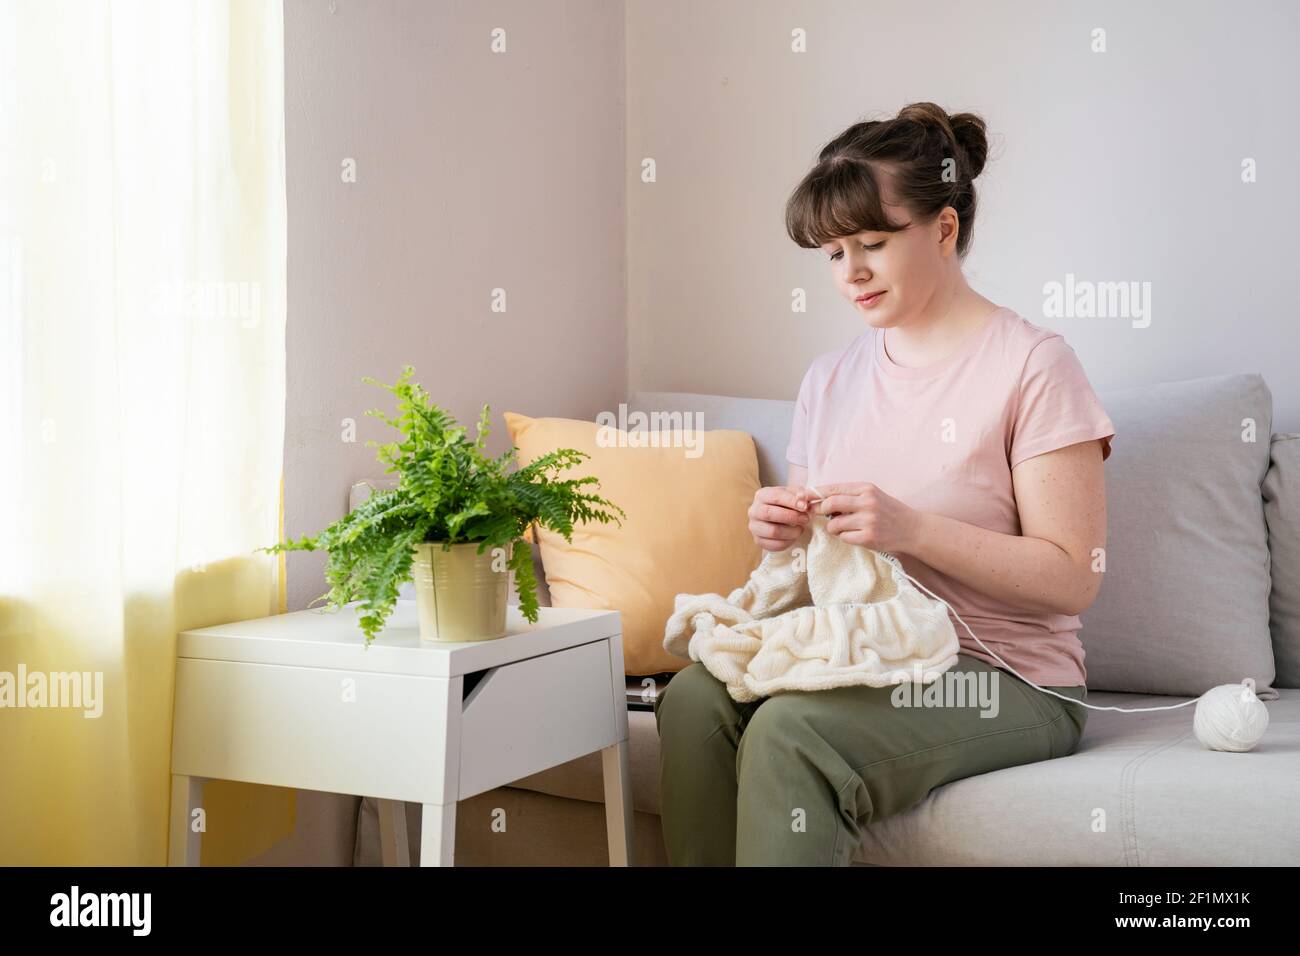 Young woman knitting white knitwear on sofa at home Stock Photo